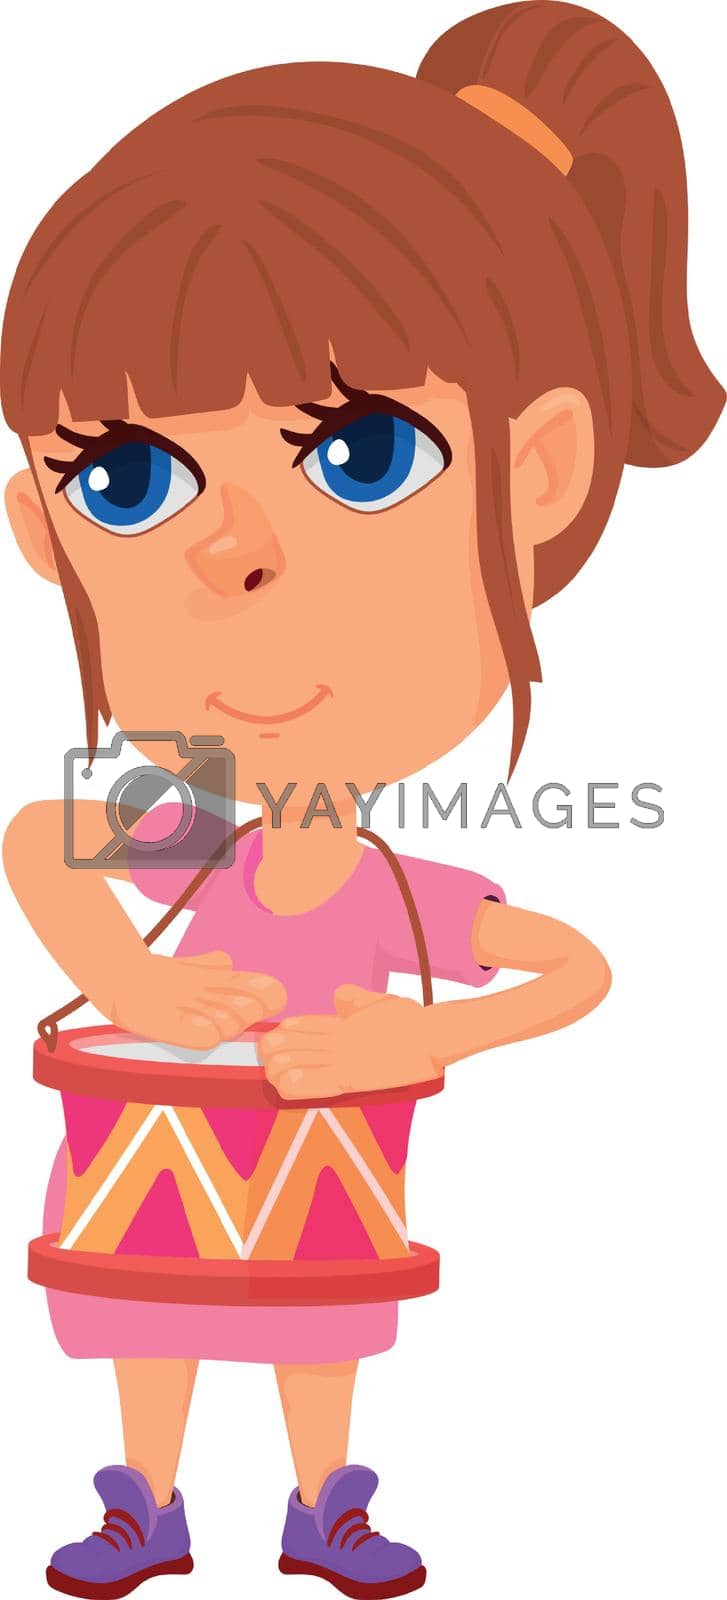 Royalty free image of Girl playing on drums. Cute musician kid character by LadadikArt